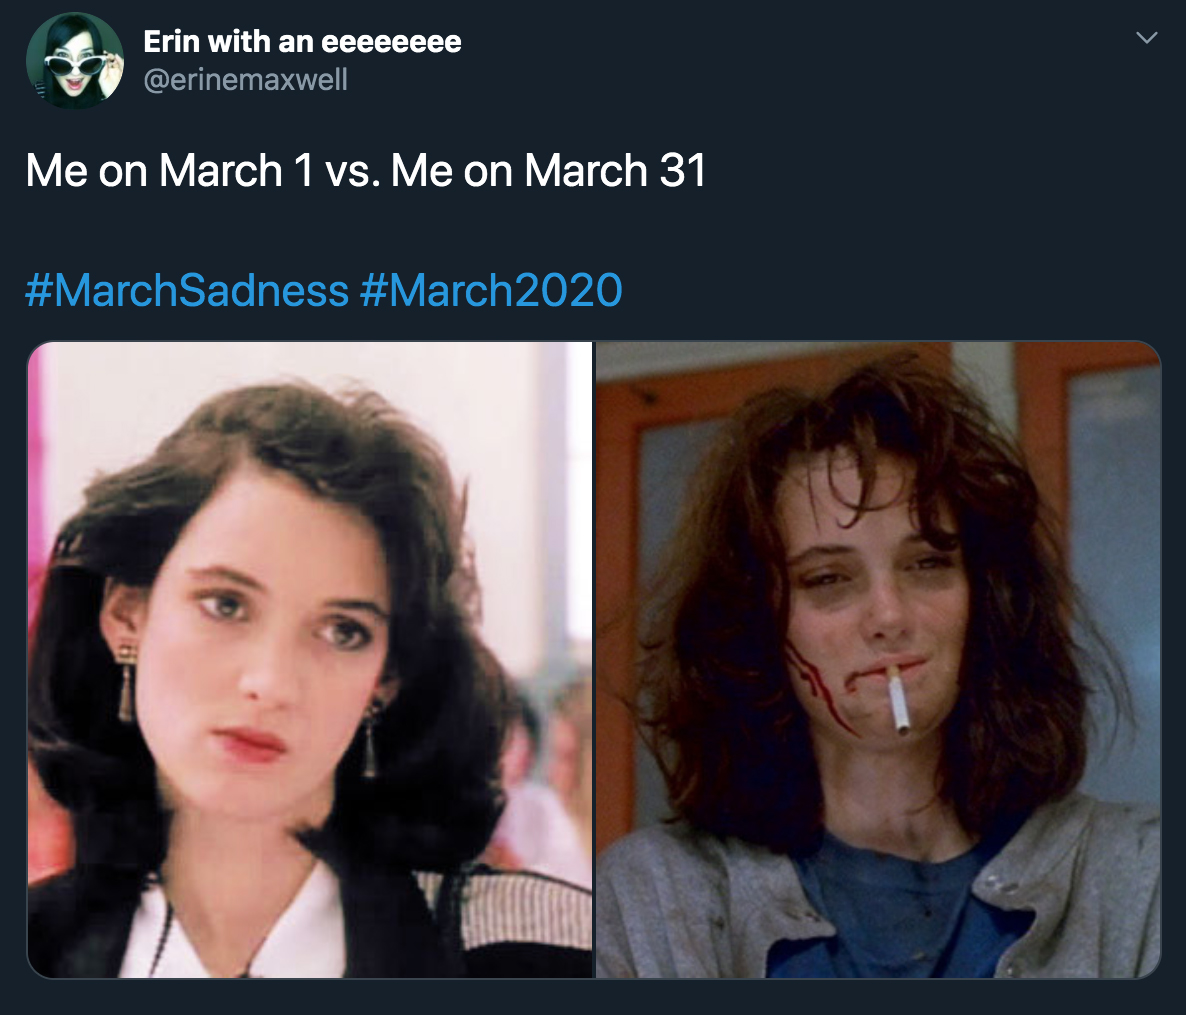 winona ryder heathers movie - Me on March 1 vs. Me on March 31